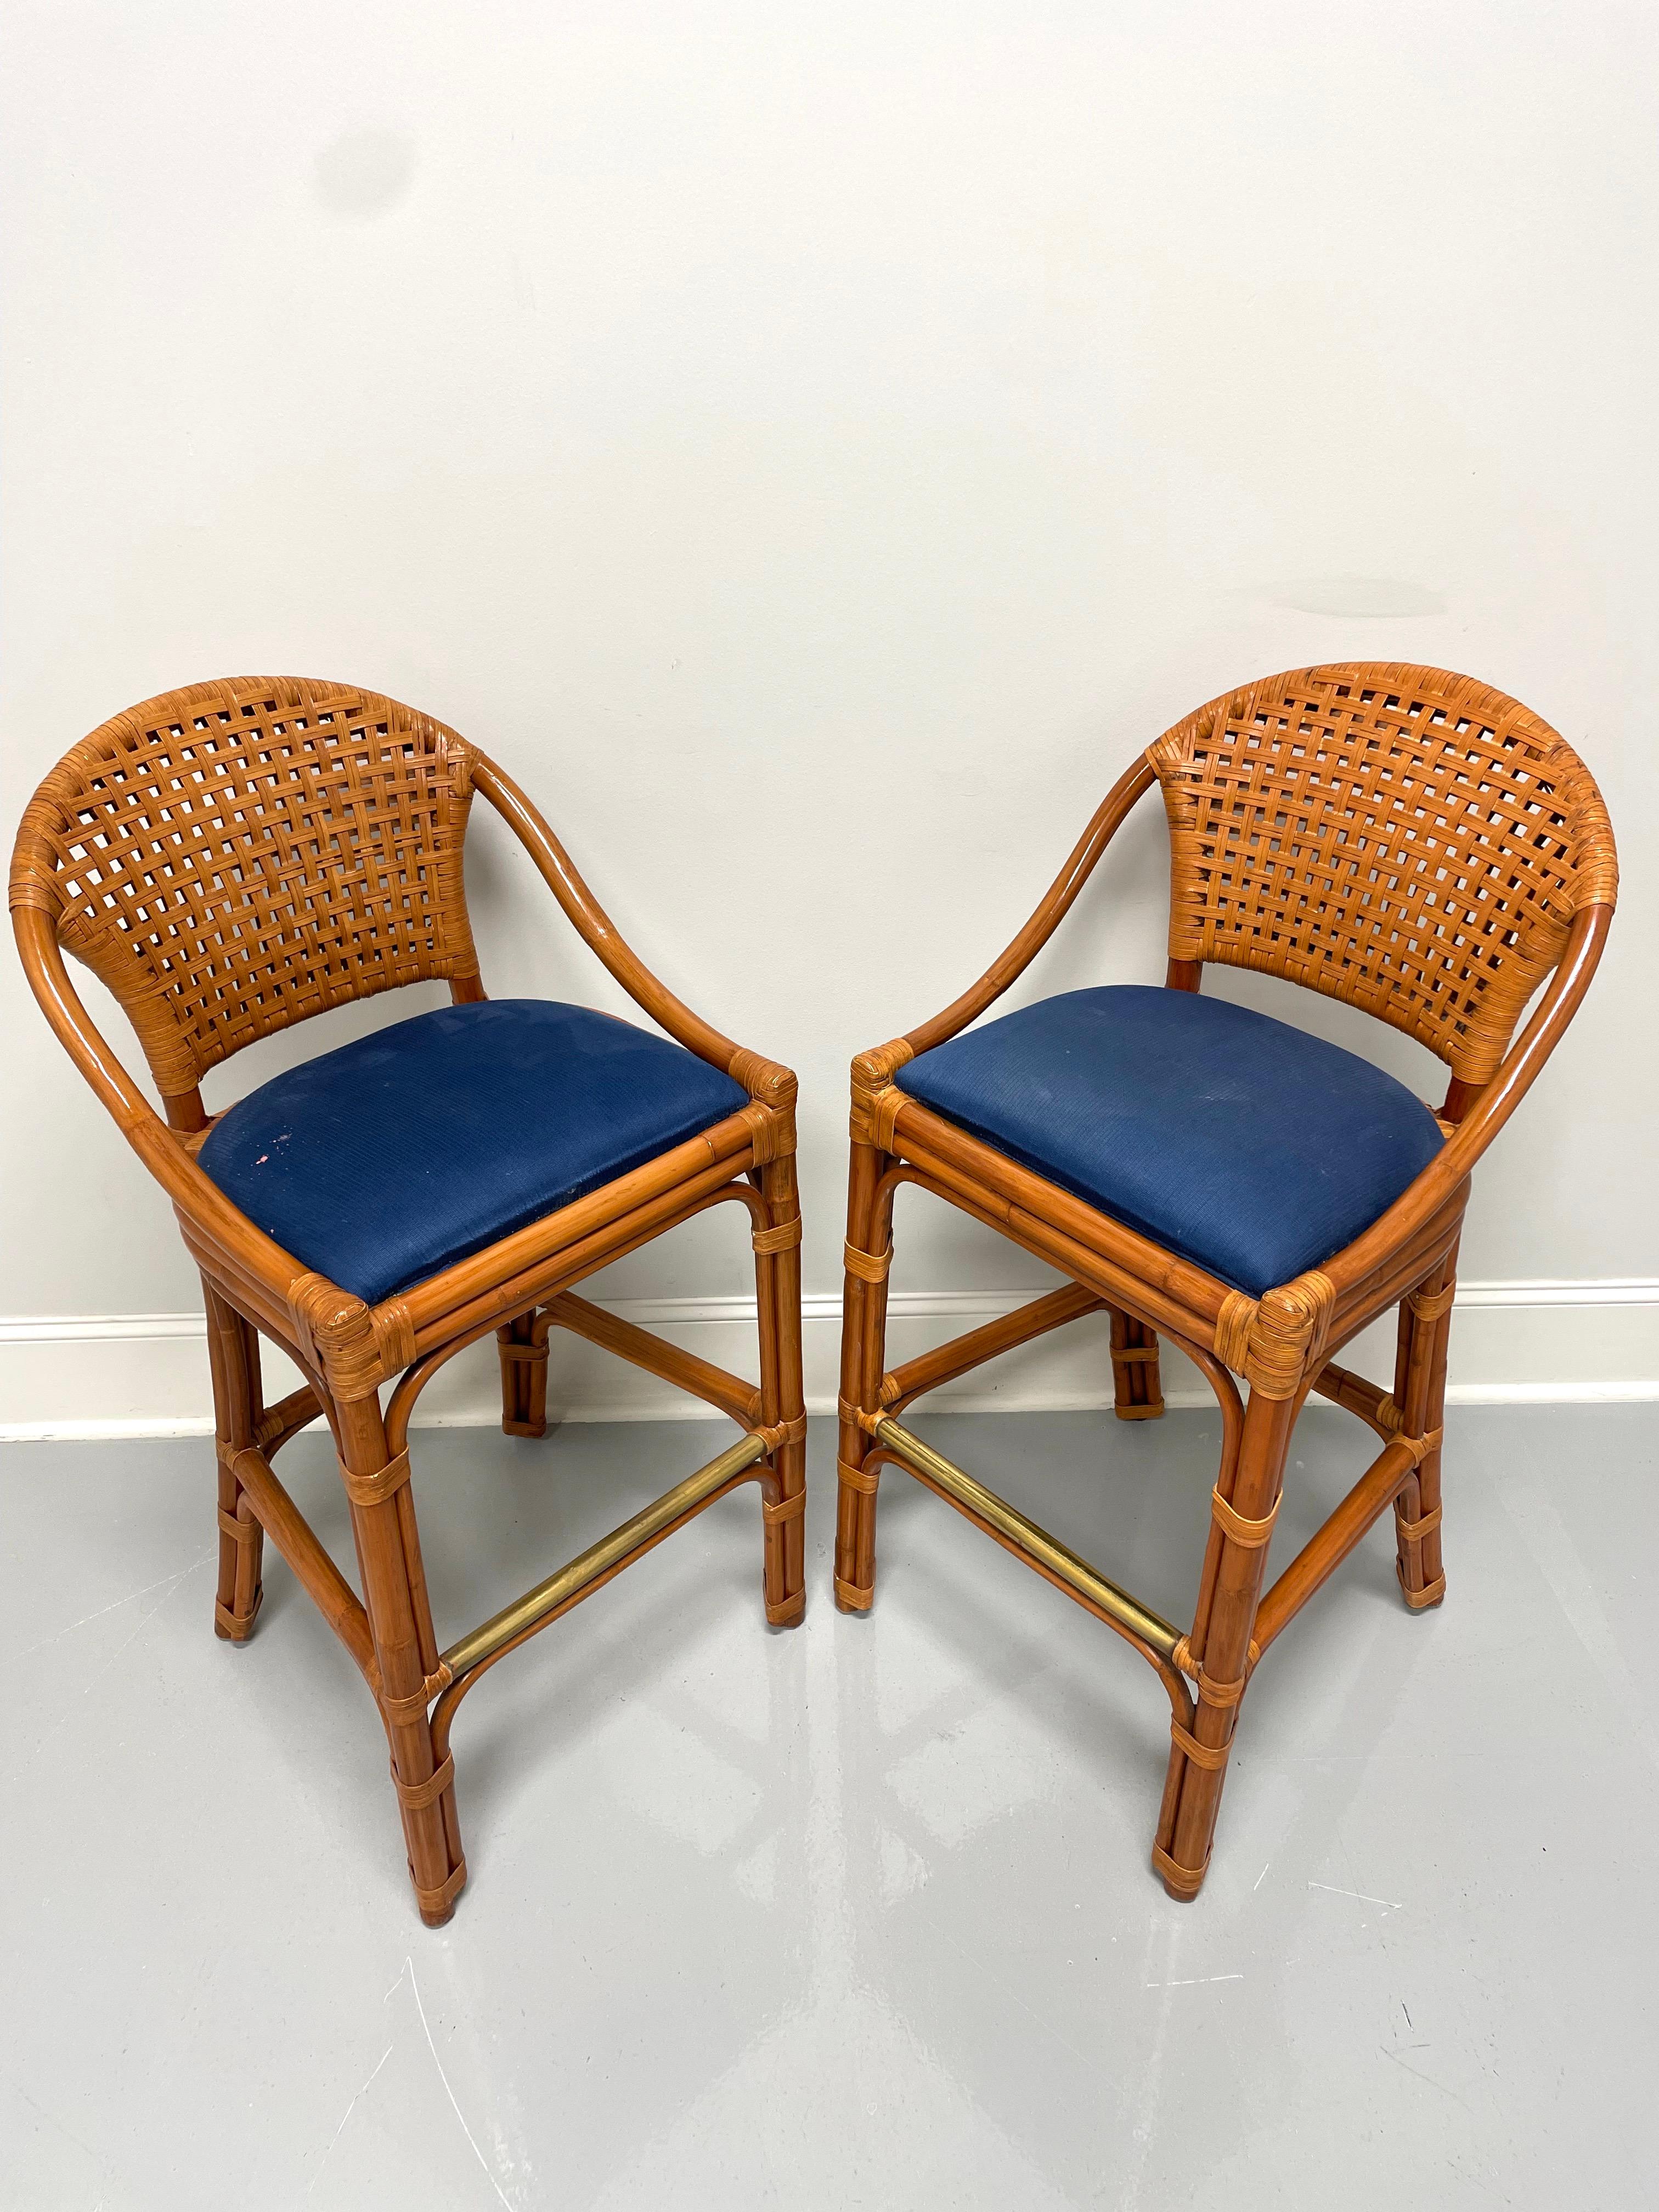 A pair of bar height barstools in a Contemporary style by Palecek. Faux bamboo, woven rattan backs & wrapping, blue corduroy fabric upholstered seats and tubular copper footrest. Made in the Philippines, in the early 21st Century.

Measures: